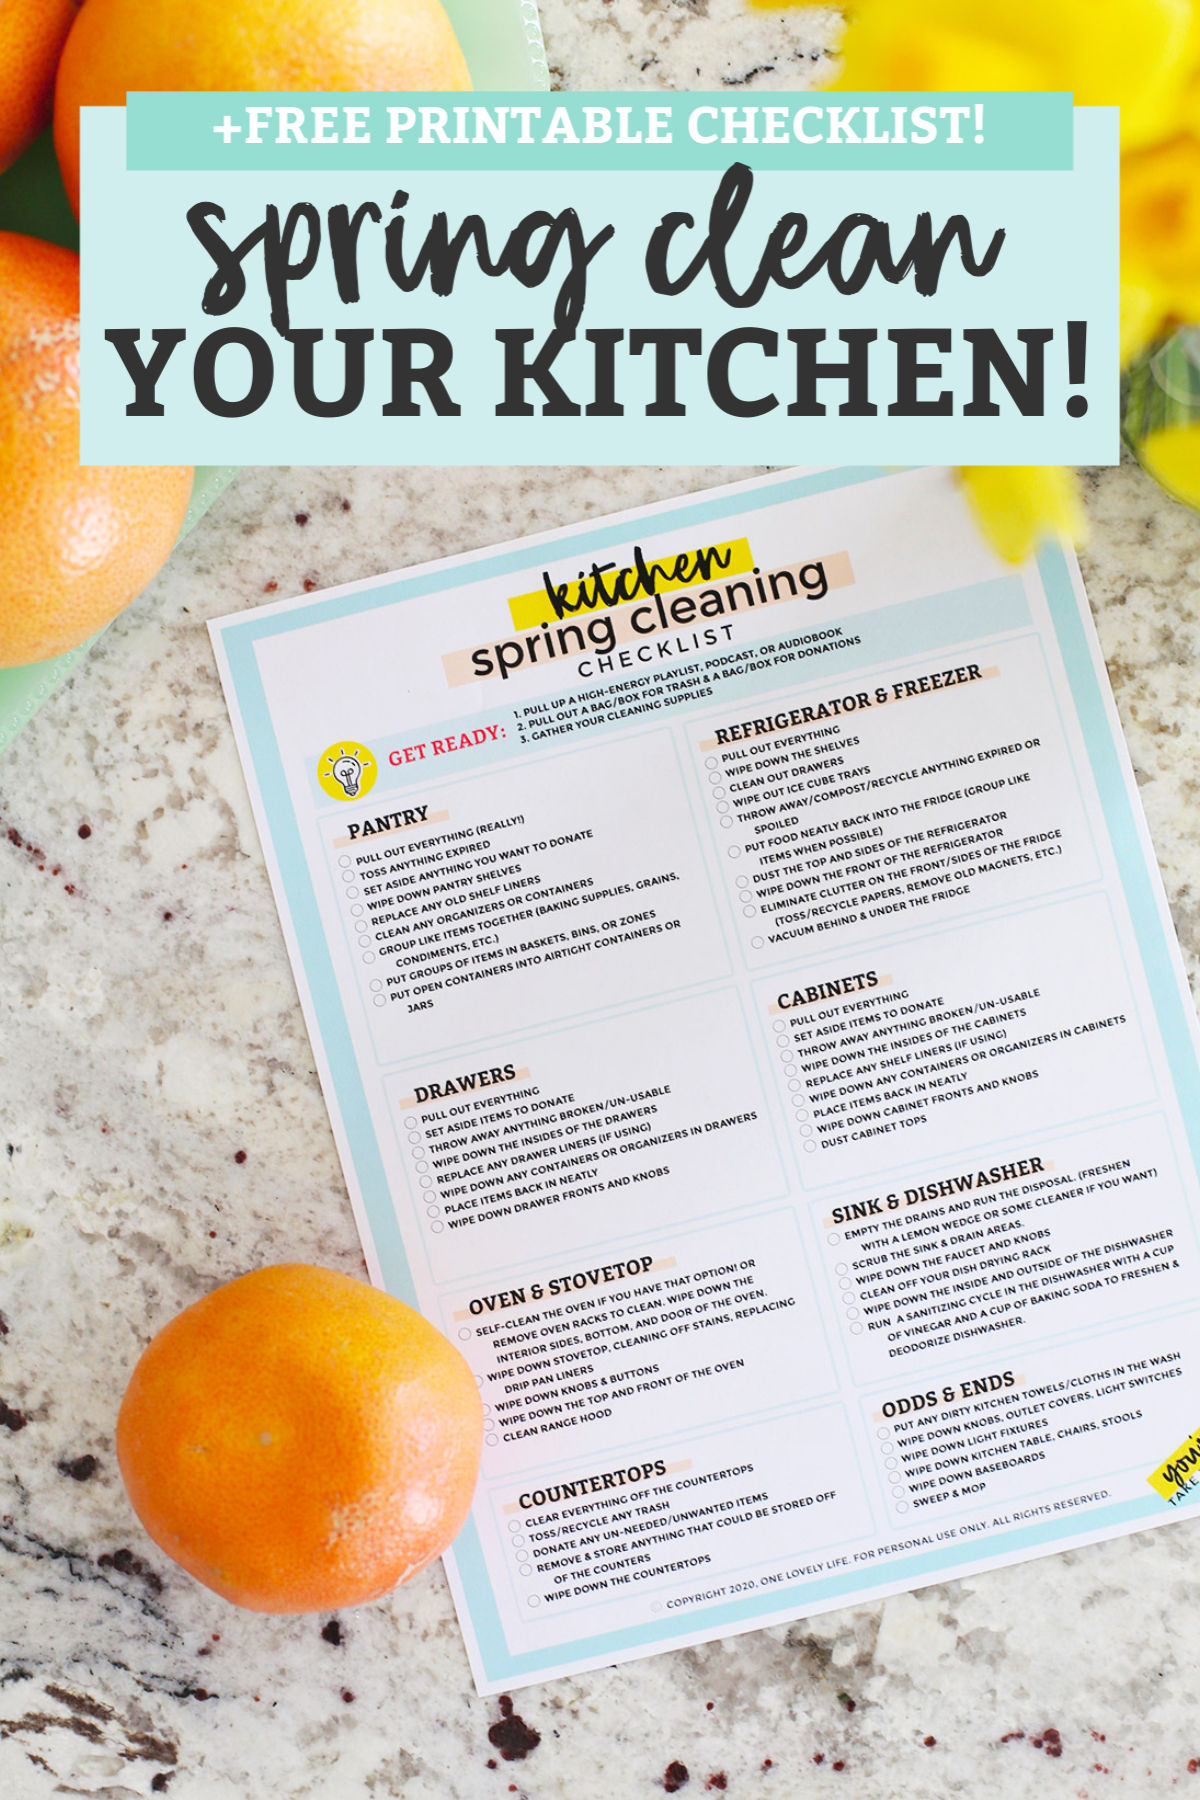 How to Deep-Clean Your Kitchen. A step-by-step checklist to clean your kitchen! Perfect for spring cleaning! // Kitchen Cleaning Tips // Spring Cleaning // Kitchen Cleaning Checklist / spring clean the kitchen / kitchen deep cleaning checklist / how to clean the kitchen step by step